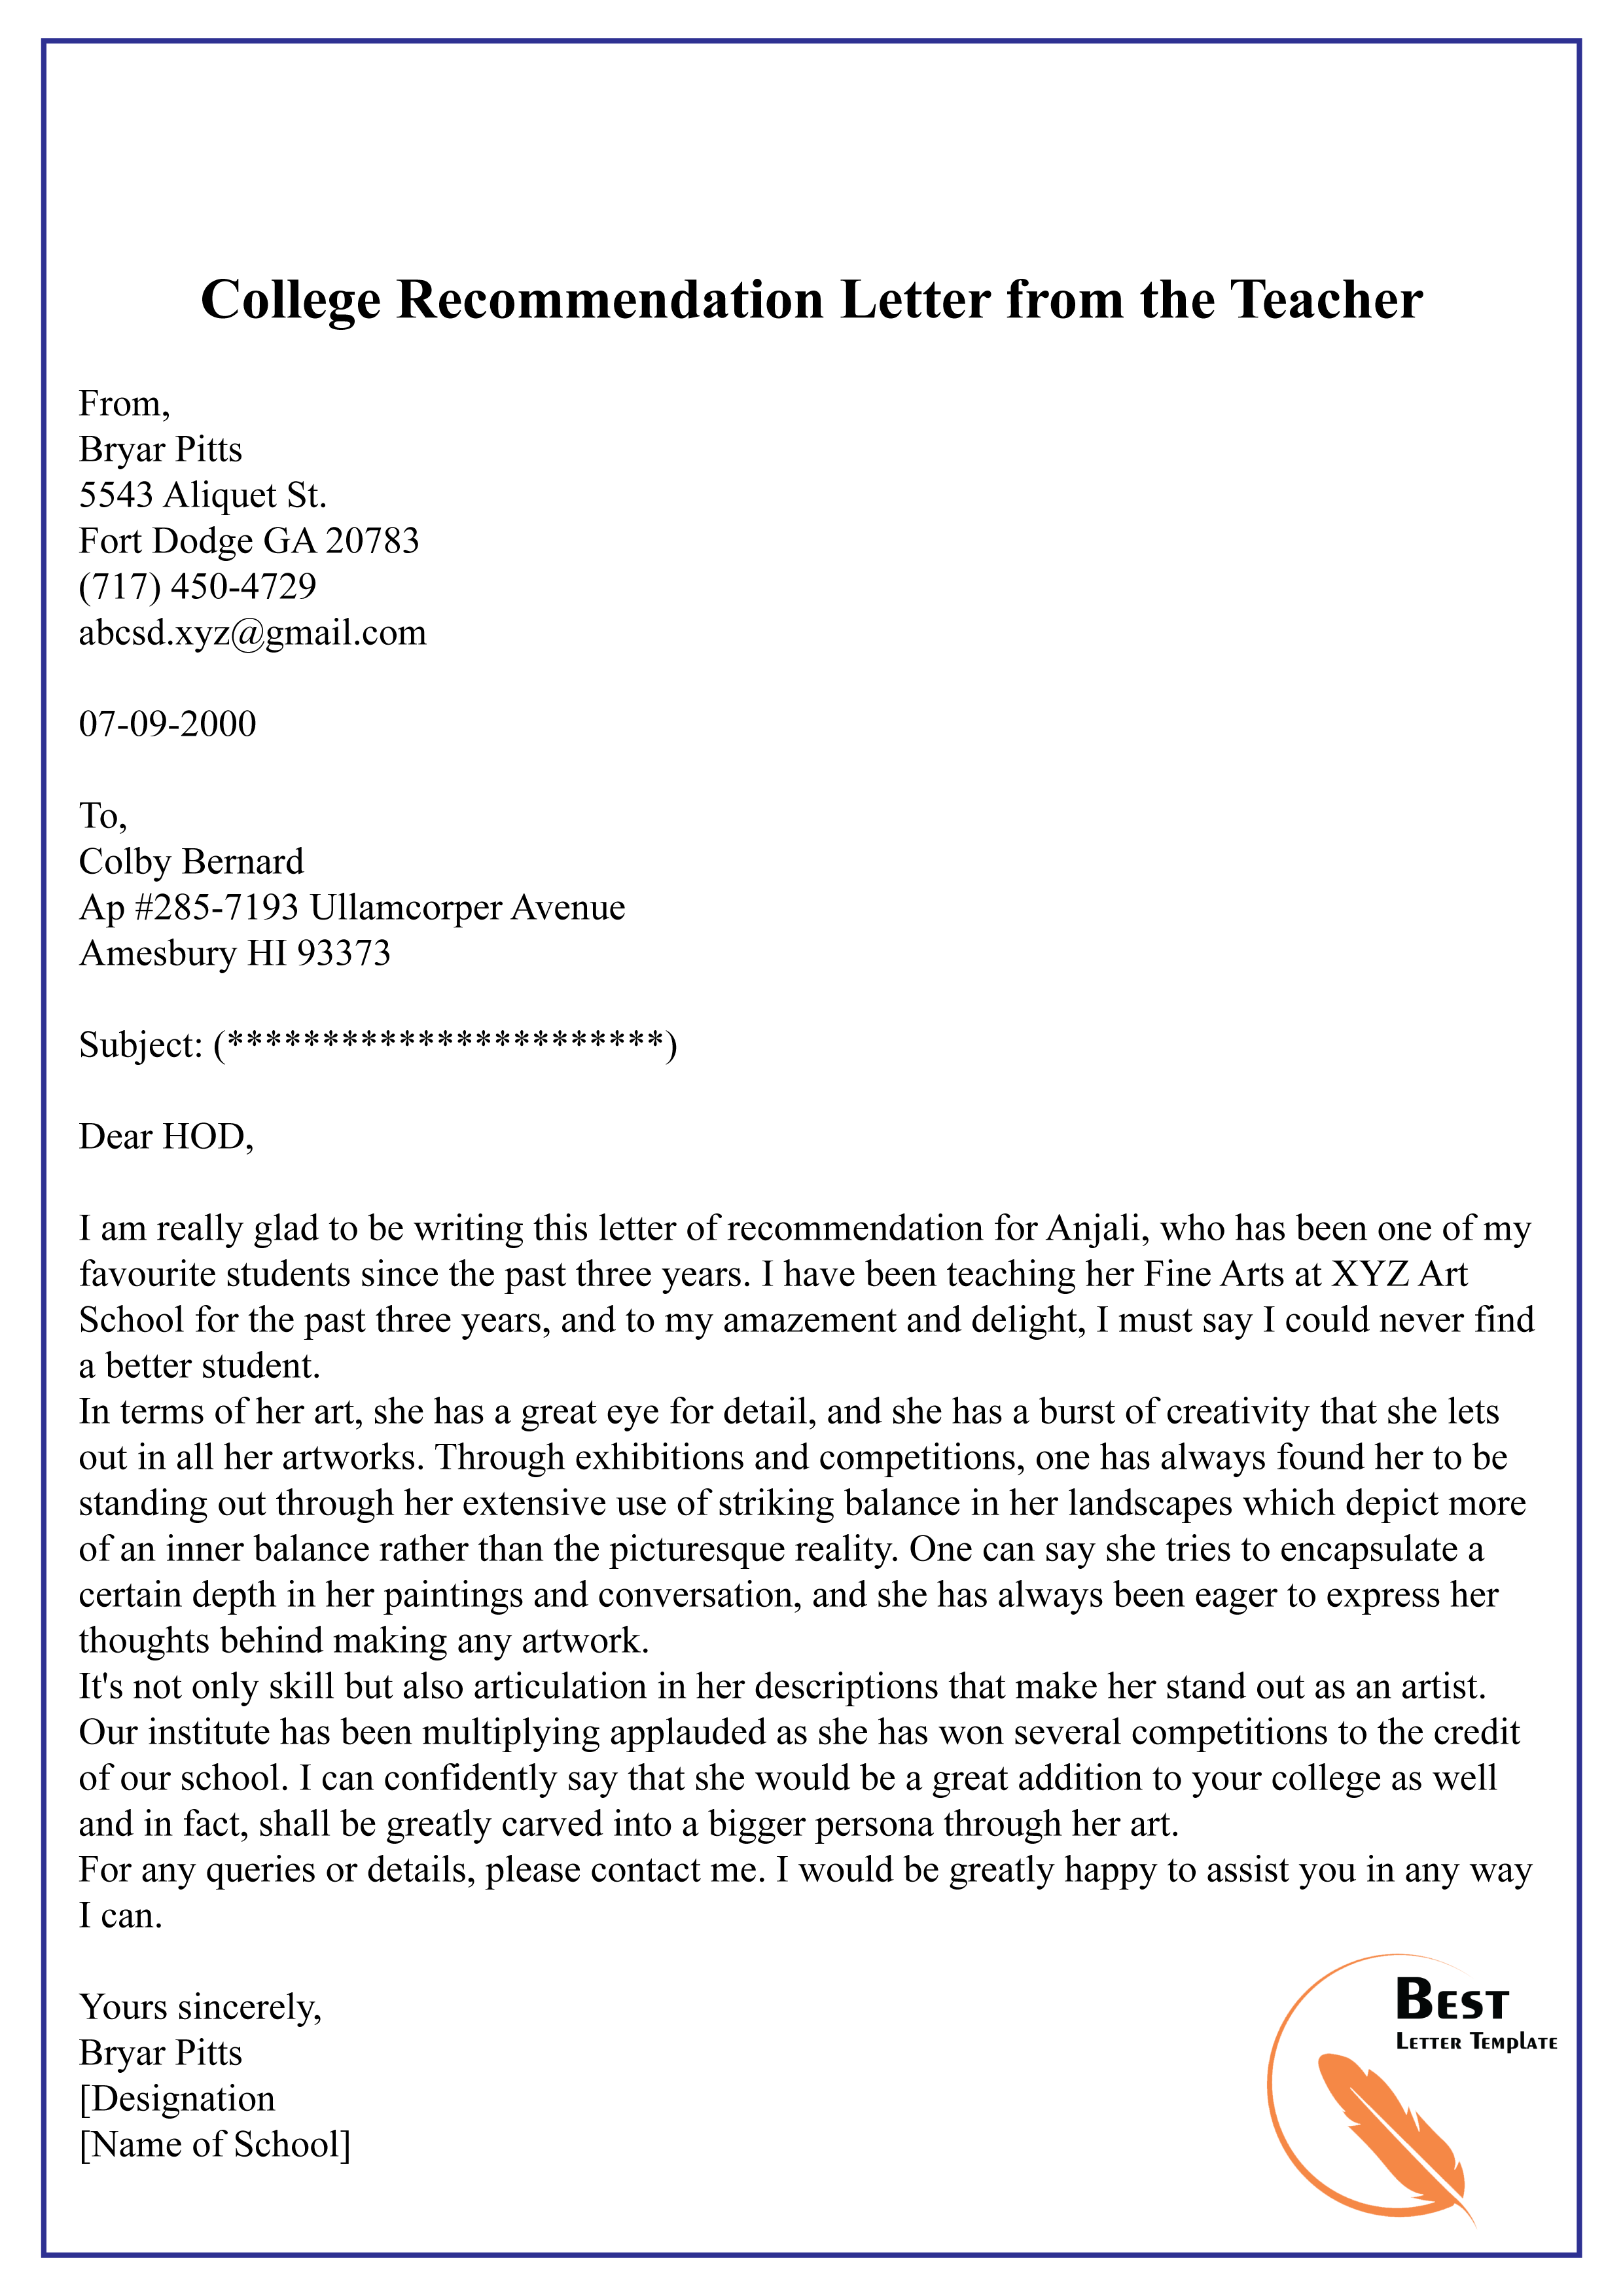 Template For College Recommendation Letter from bestlettertemplate.com